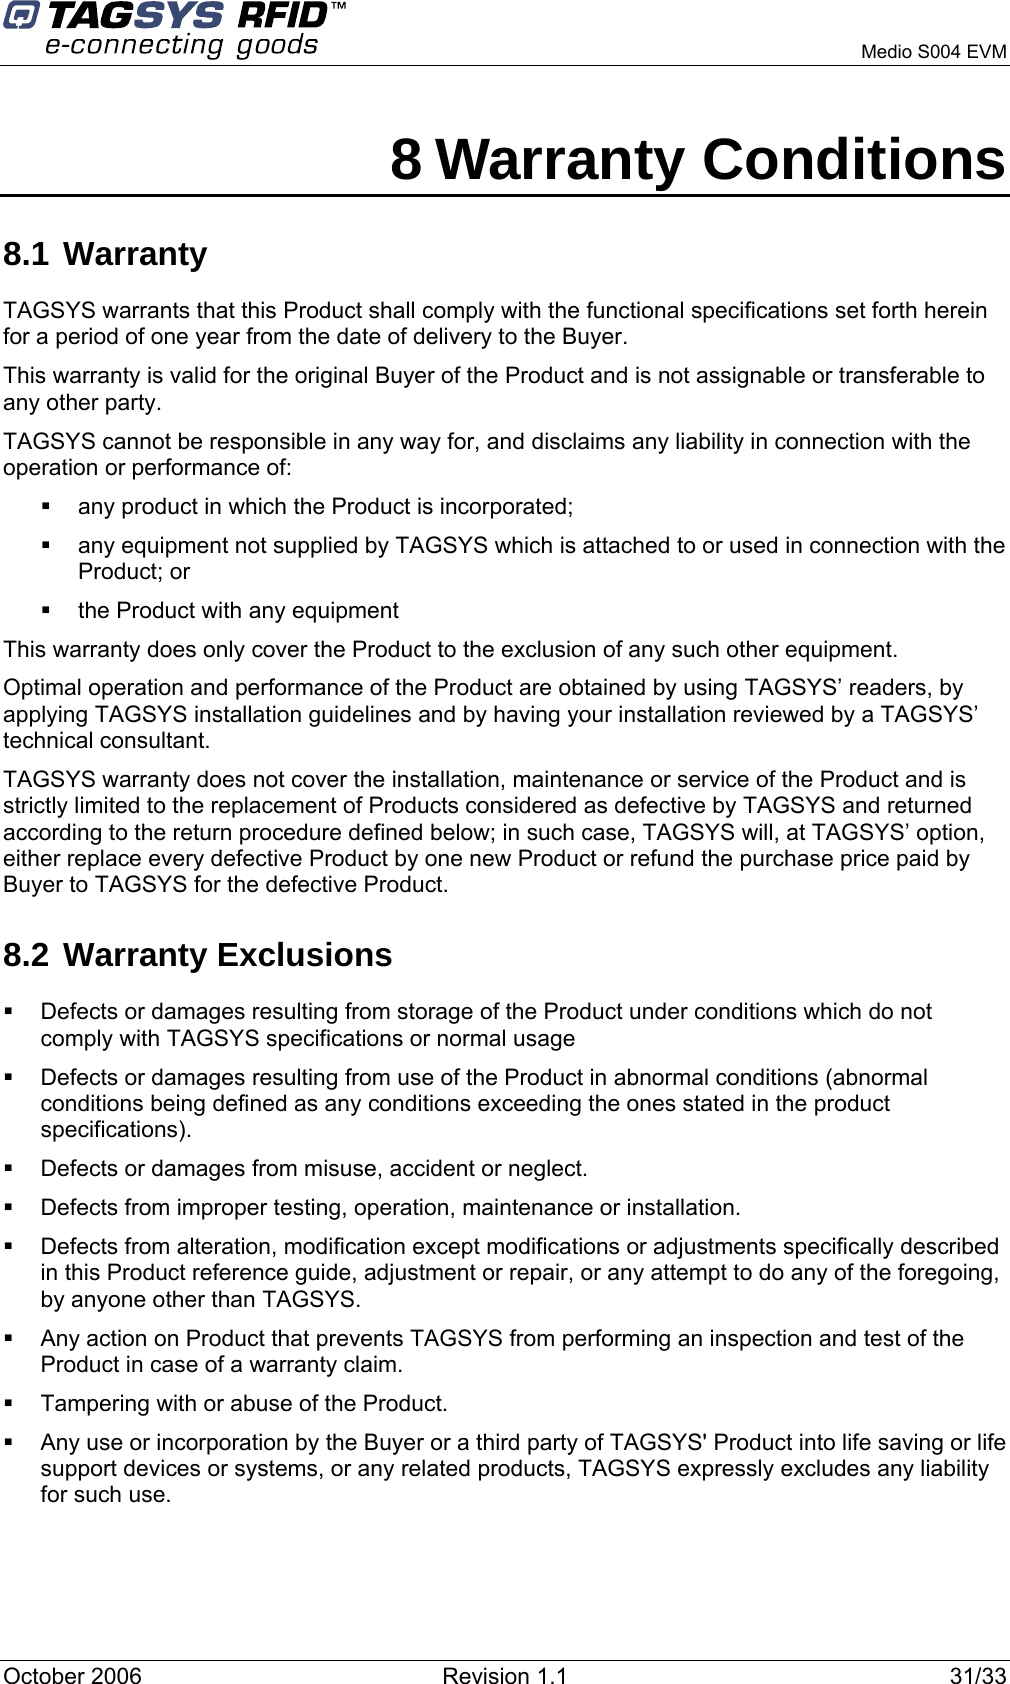      Medio S004 EVM 8 Warranty Conditions 8.1 Warranty TAGSYS warrants that this Product shall comply with the functional specifications set forth herein for a period of one year from the date of delivery to the Buyer. This warranty is valid for the original Buyer of the Product and is not assignable or transferable to any other party. TAGSYS cannot be responsible in any way for, and disclaims any liability in connection with the operation or performance of:   any product in which the Product is incorporated;   any equipment not supplied by TAGSYS which is attached to or used in connection with the Product; or   the Product with any equipment This warranty does only cover the Product to the exclusion of any such other equipment. Optimal operation and performance of the Product are obtained by using TAGSYS’ readers, by applying TAGSYS installation guidelines and by having your installation reviewed by a TAGSYS’ technical consultant. TAGSYS warranty does not cover the installation, maintenance or service of the Product and is strictly limited to the replacement of Products considered as defective by TAGSYS and returned according to the return procedure defined below; in such case, TAGSYS will, at TAGSYS’ option, either replace every defective Product by one new Product or refund the purchase price paid by Buyer to TAGSYS for the defective Product. 8.2 Warranty Exclusions   Defects or damages resulting from storage of the Product under conditions which do not comply with TAGSYS specifications or normal usage   Defects or damages resulting from use of the Product in abnormal conditions (abnormal conditions being defined as any conditions exceeding the ones stated in the product specifications).   Defects or damages from misuse, accident or neglect.   Defects from improper testing, operation, maintenance or installation.   Defects from alteration, modification except modifications or adjustments specifically described in this Product reference guide, adjustment or repair, or any attempt to do any of the foregoing, by anyone other than TAGSYS.   Any action on Product that prevents TAGSYS from performing an inspection and test of the Product in case of a warranty claim.   Tampering with or abuse of the Product.   Any use or incorporation by the Buyer or a third party of TAGSYS&apos; Product into life saving or life support devices or systems, or any related products, TAGSYS expressly excludes any liability for such use. October 2006  Revision 1.1  31/33 